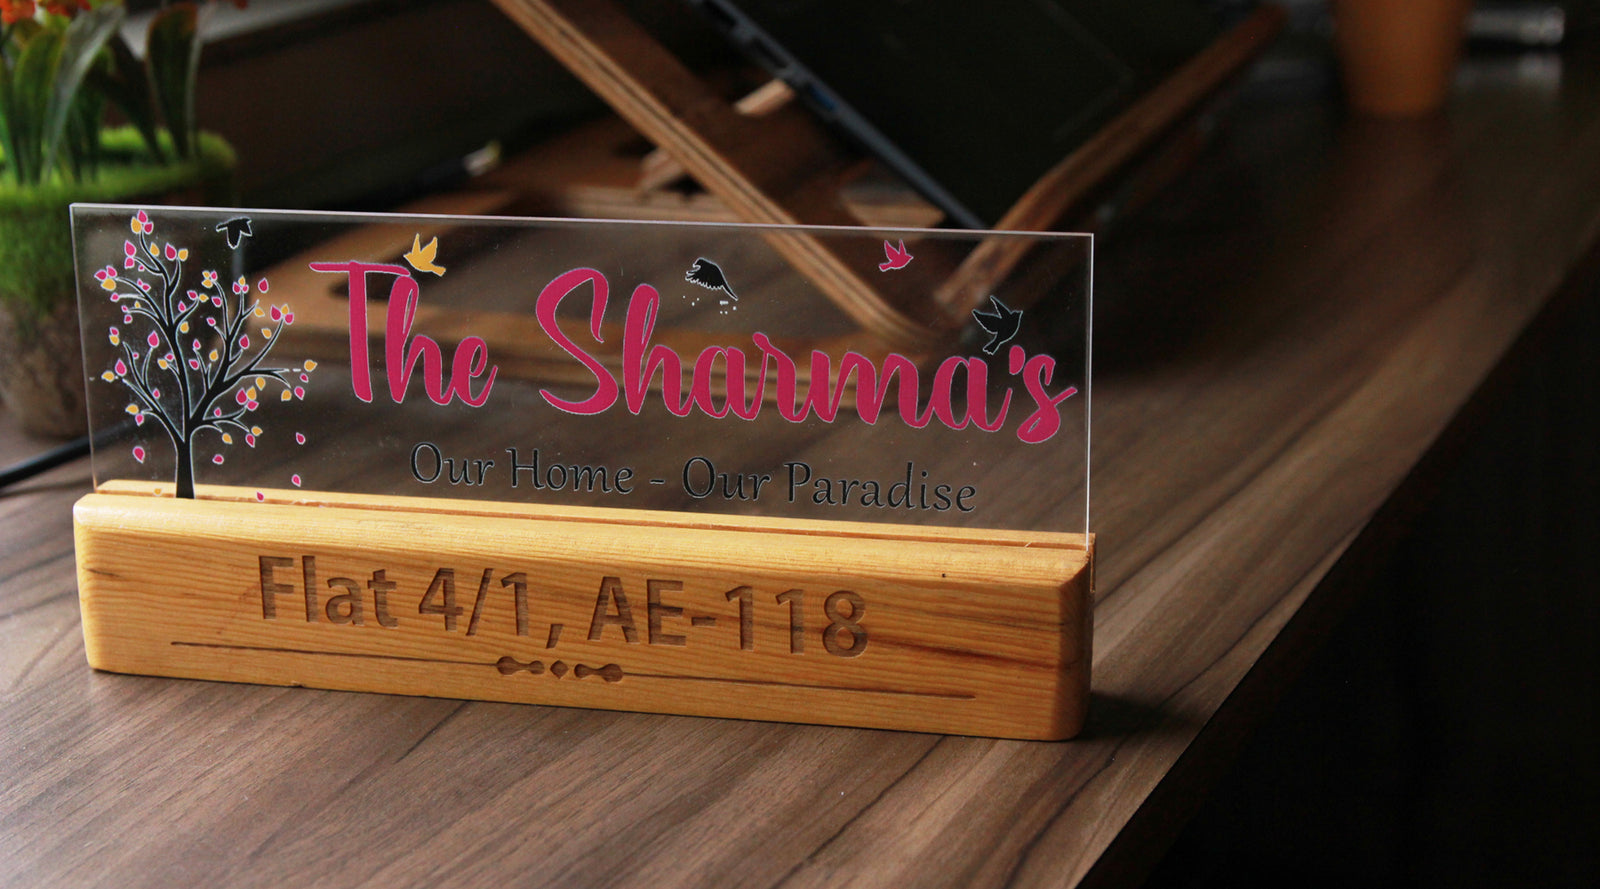 Personalized Engraved Name Plate: Gift/Send Home and Living Gifts Online  M11097930 |IGP.com